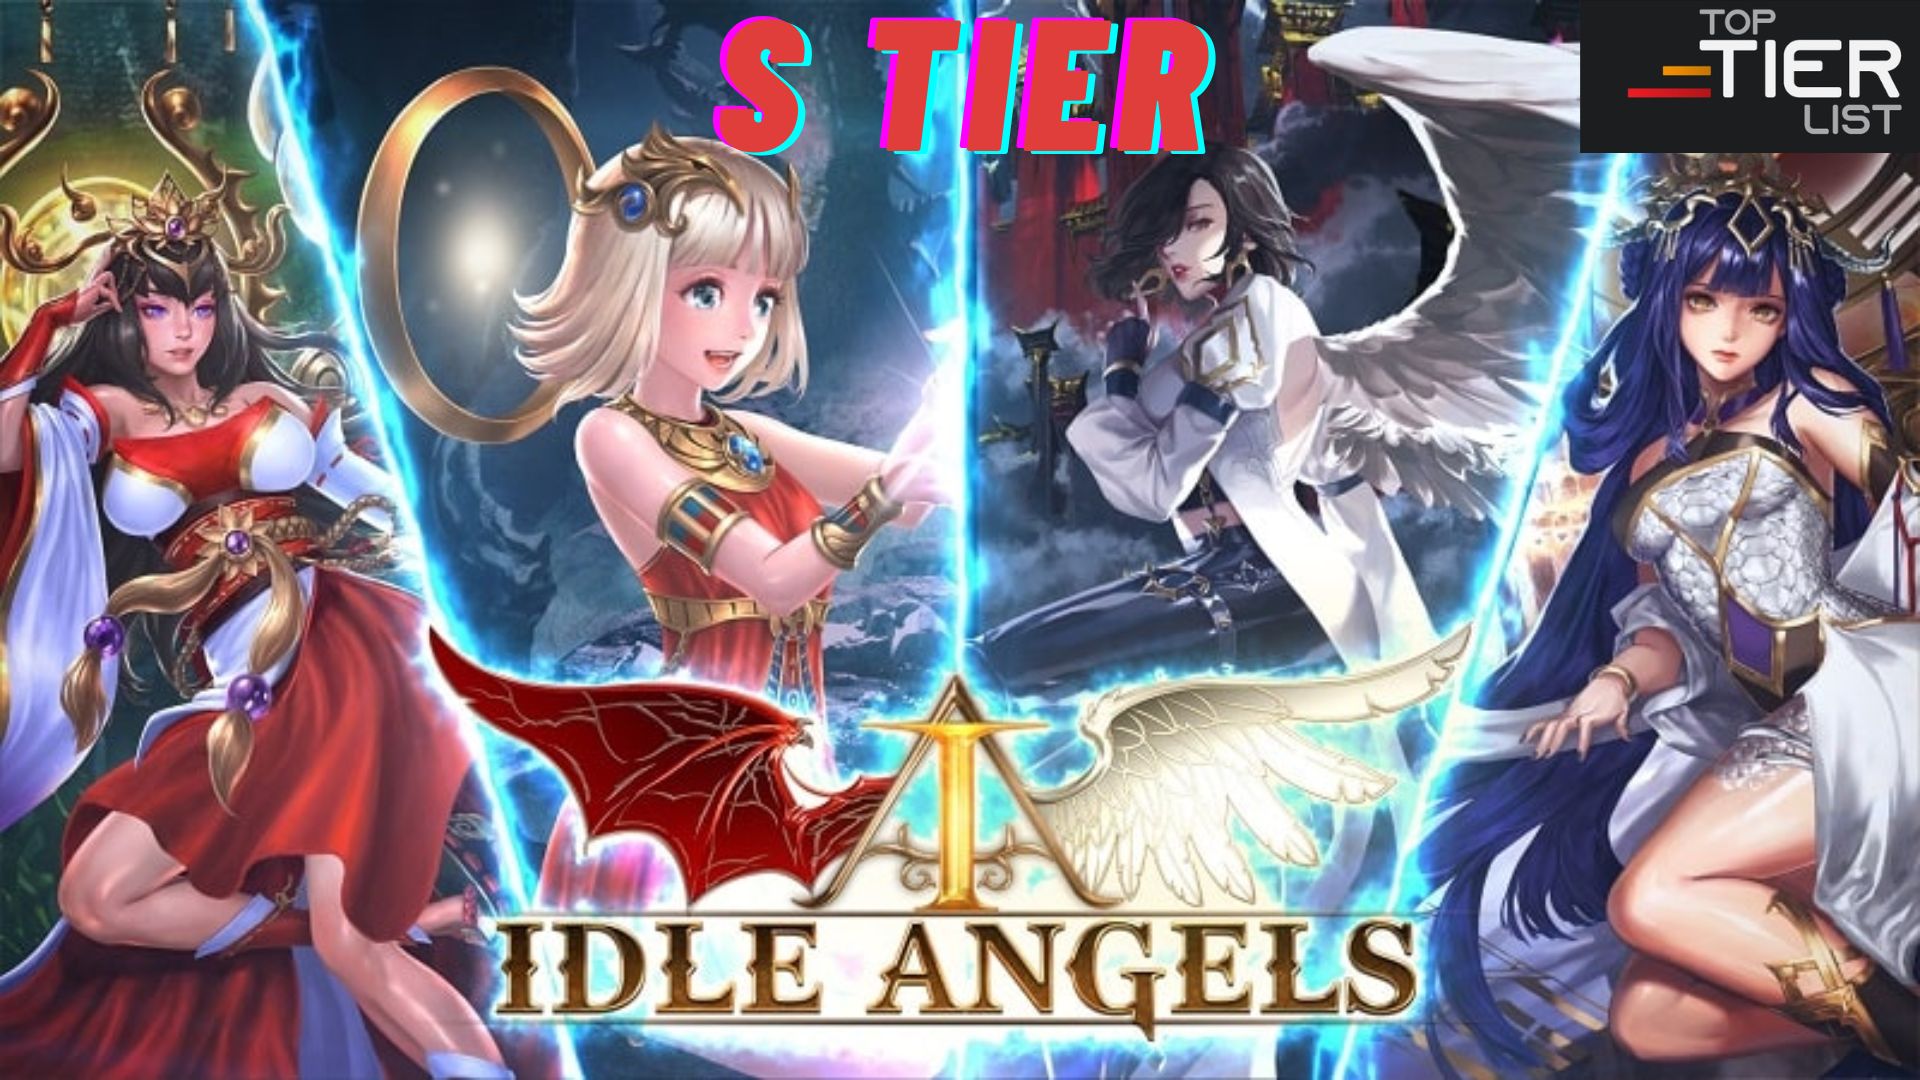 Idle Angels Tier List: Cruise to Victory